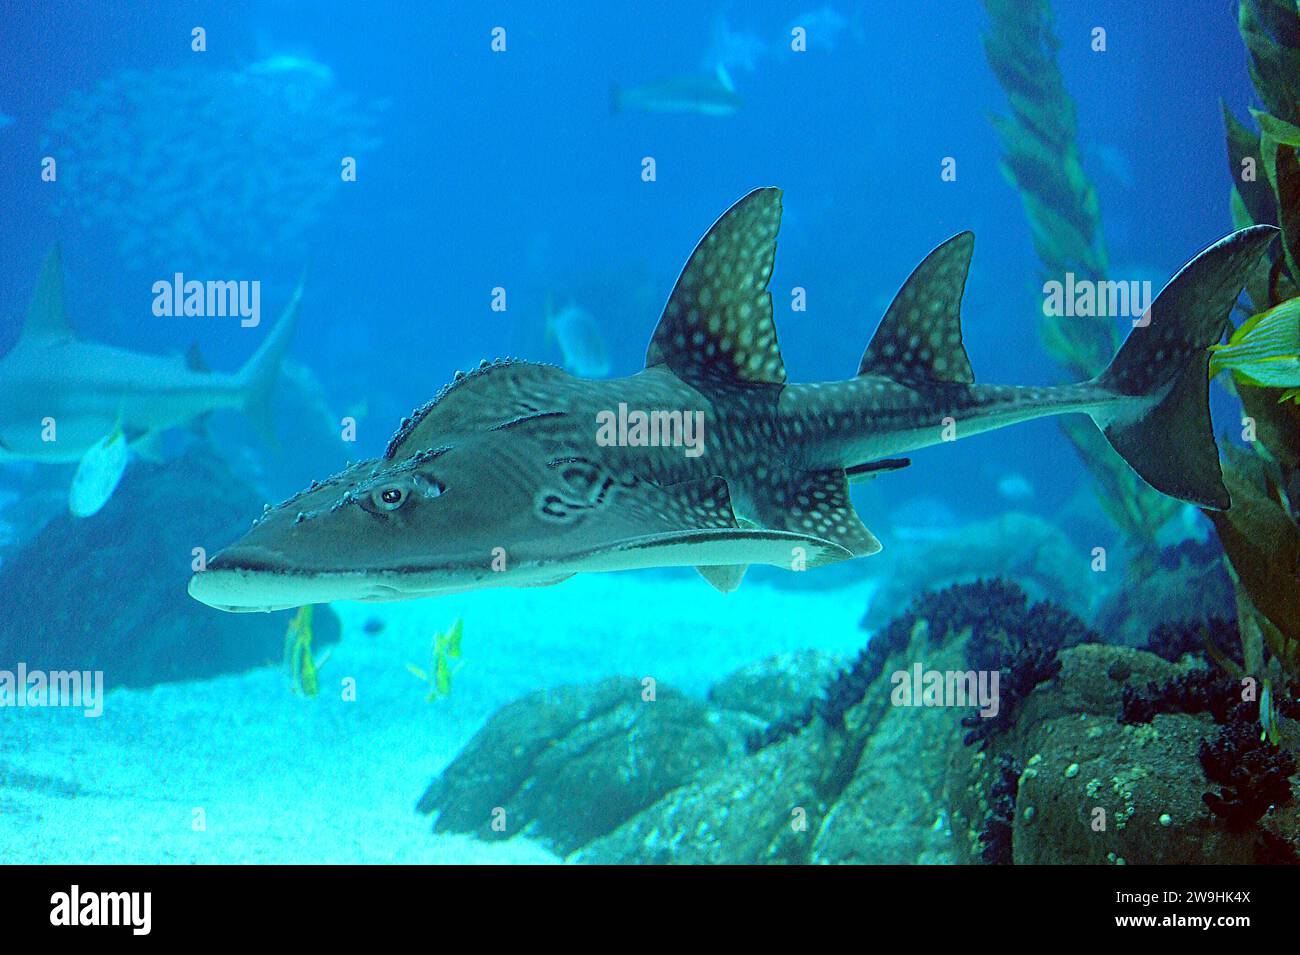 Bowmouth guitarfish (Rhina ancylostoma) is a cartilaginous fish native to western Indo-Pacific Ocean. Stock Photo